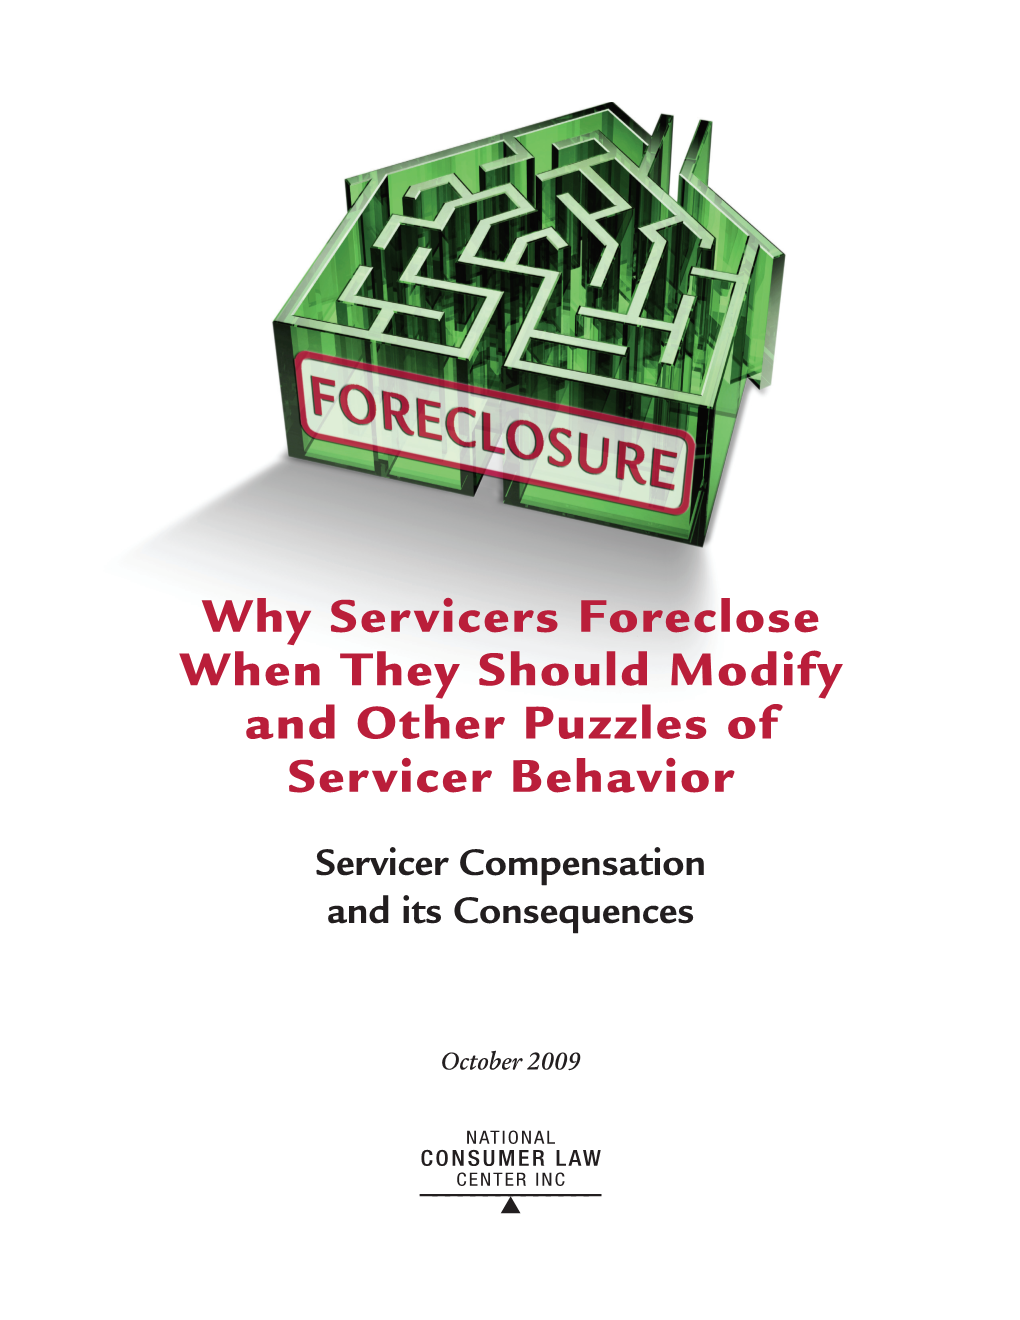 Why Servicers Foreclose When They Should Modify and Other Puzzles of Servicer Behavior